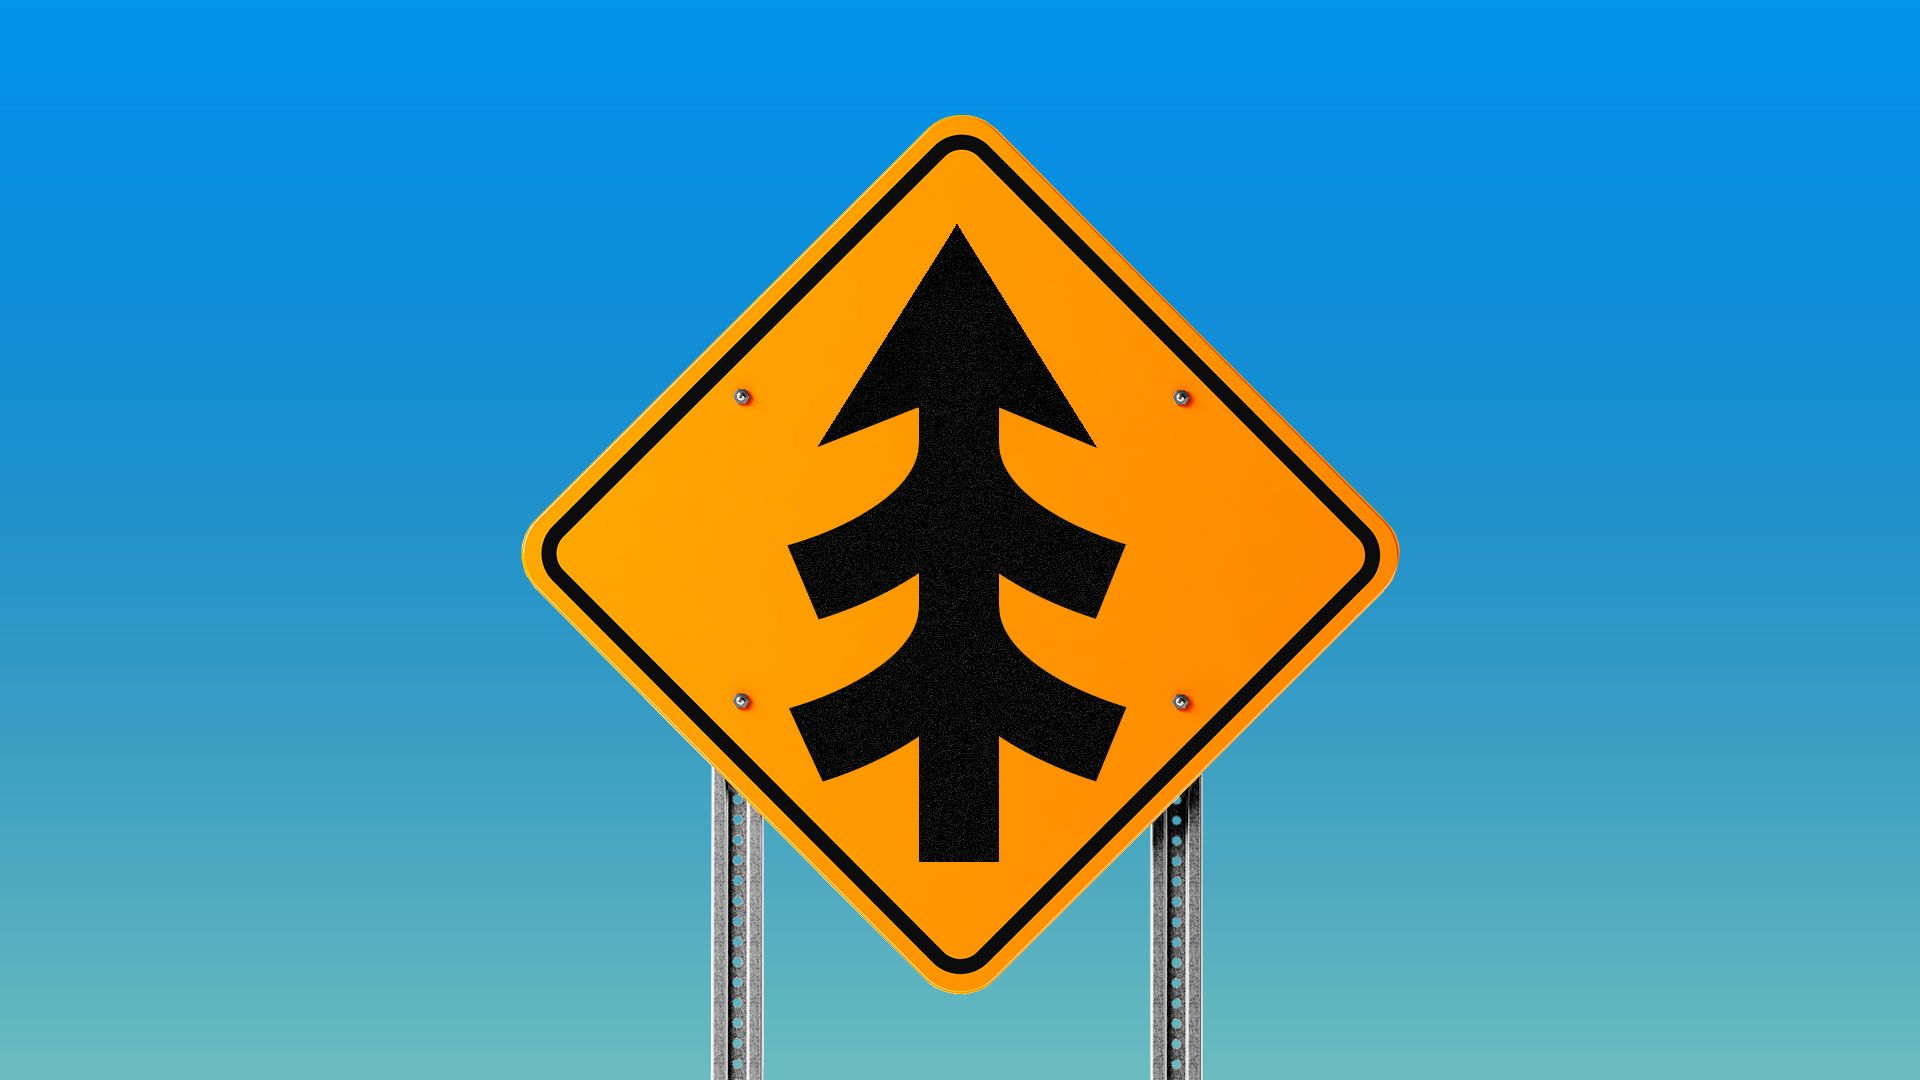 Illustration of road sign with multiple arrows merging